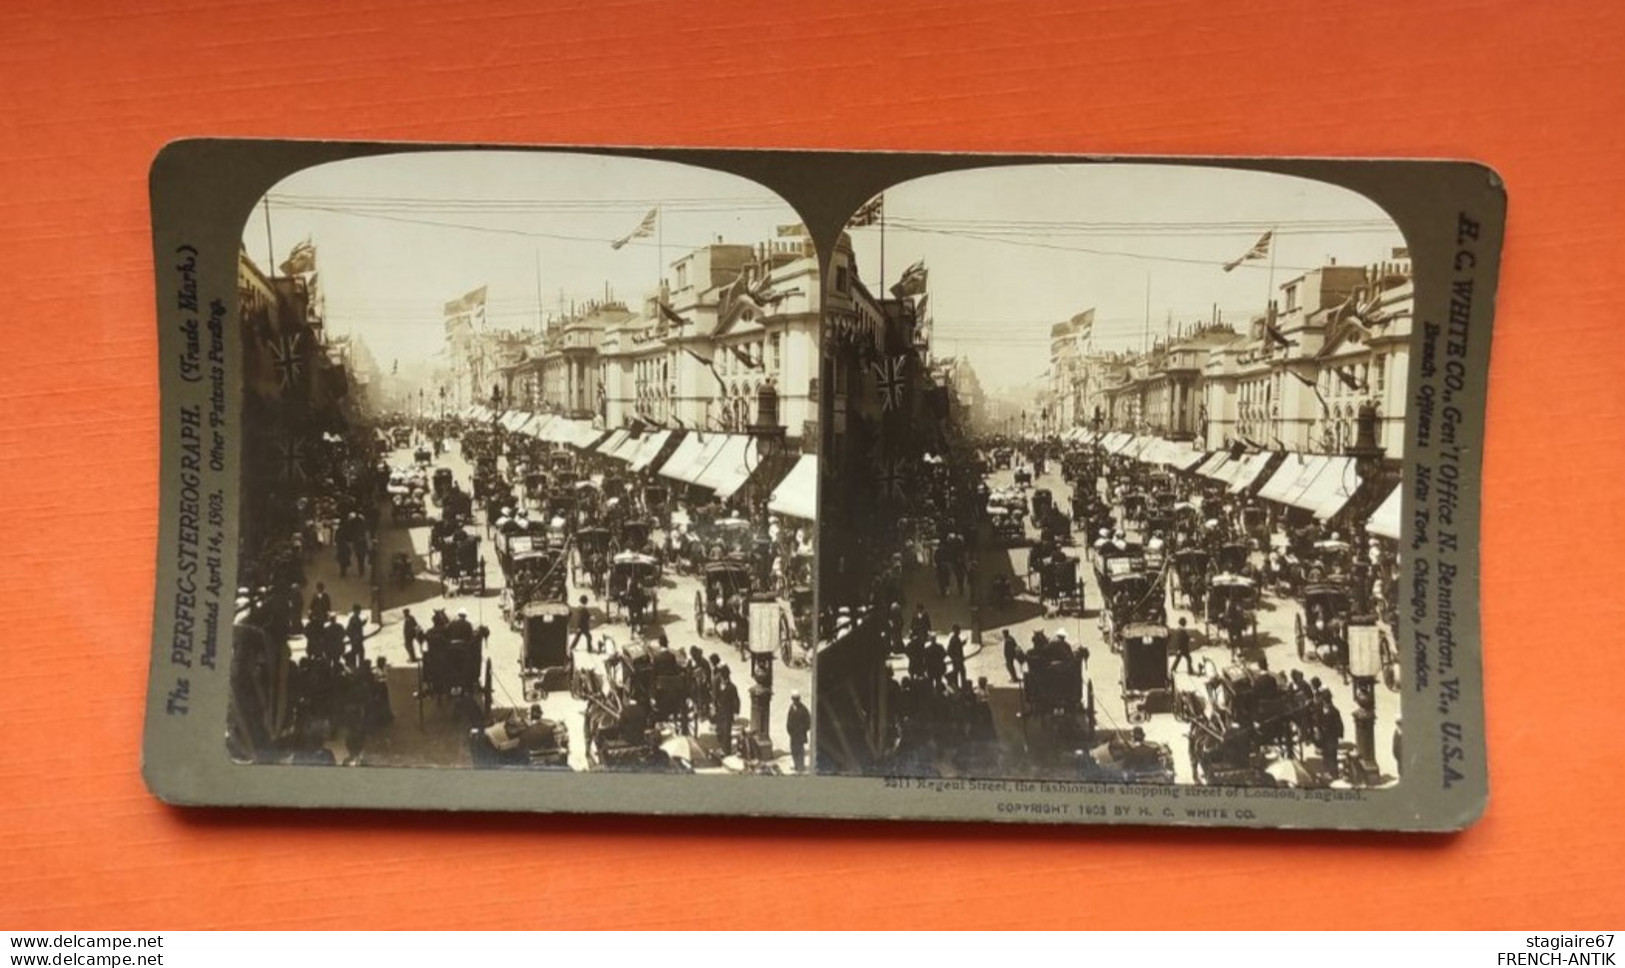 PHOTO STÉRÉO H.C. WHITE CO USA REGENT STREET THE FASHIONABLE SHOPPING STREET OF LONDON ENGLAND - Stereo-Photographie